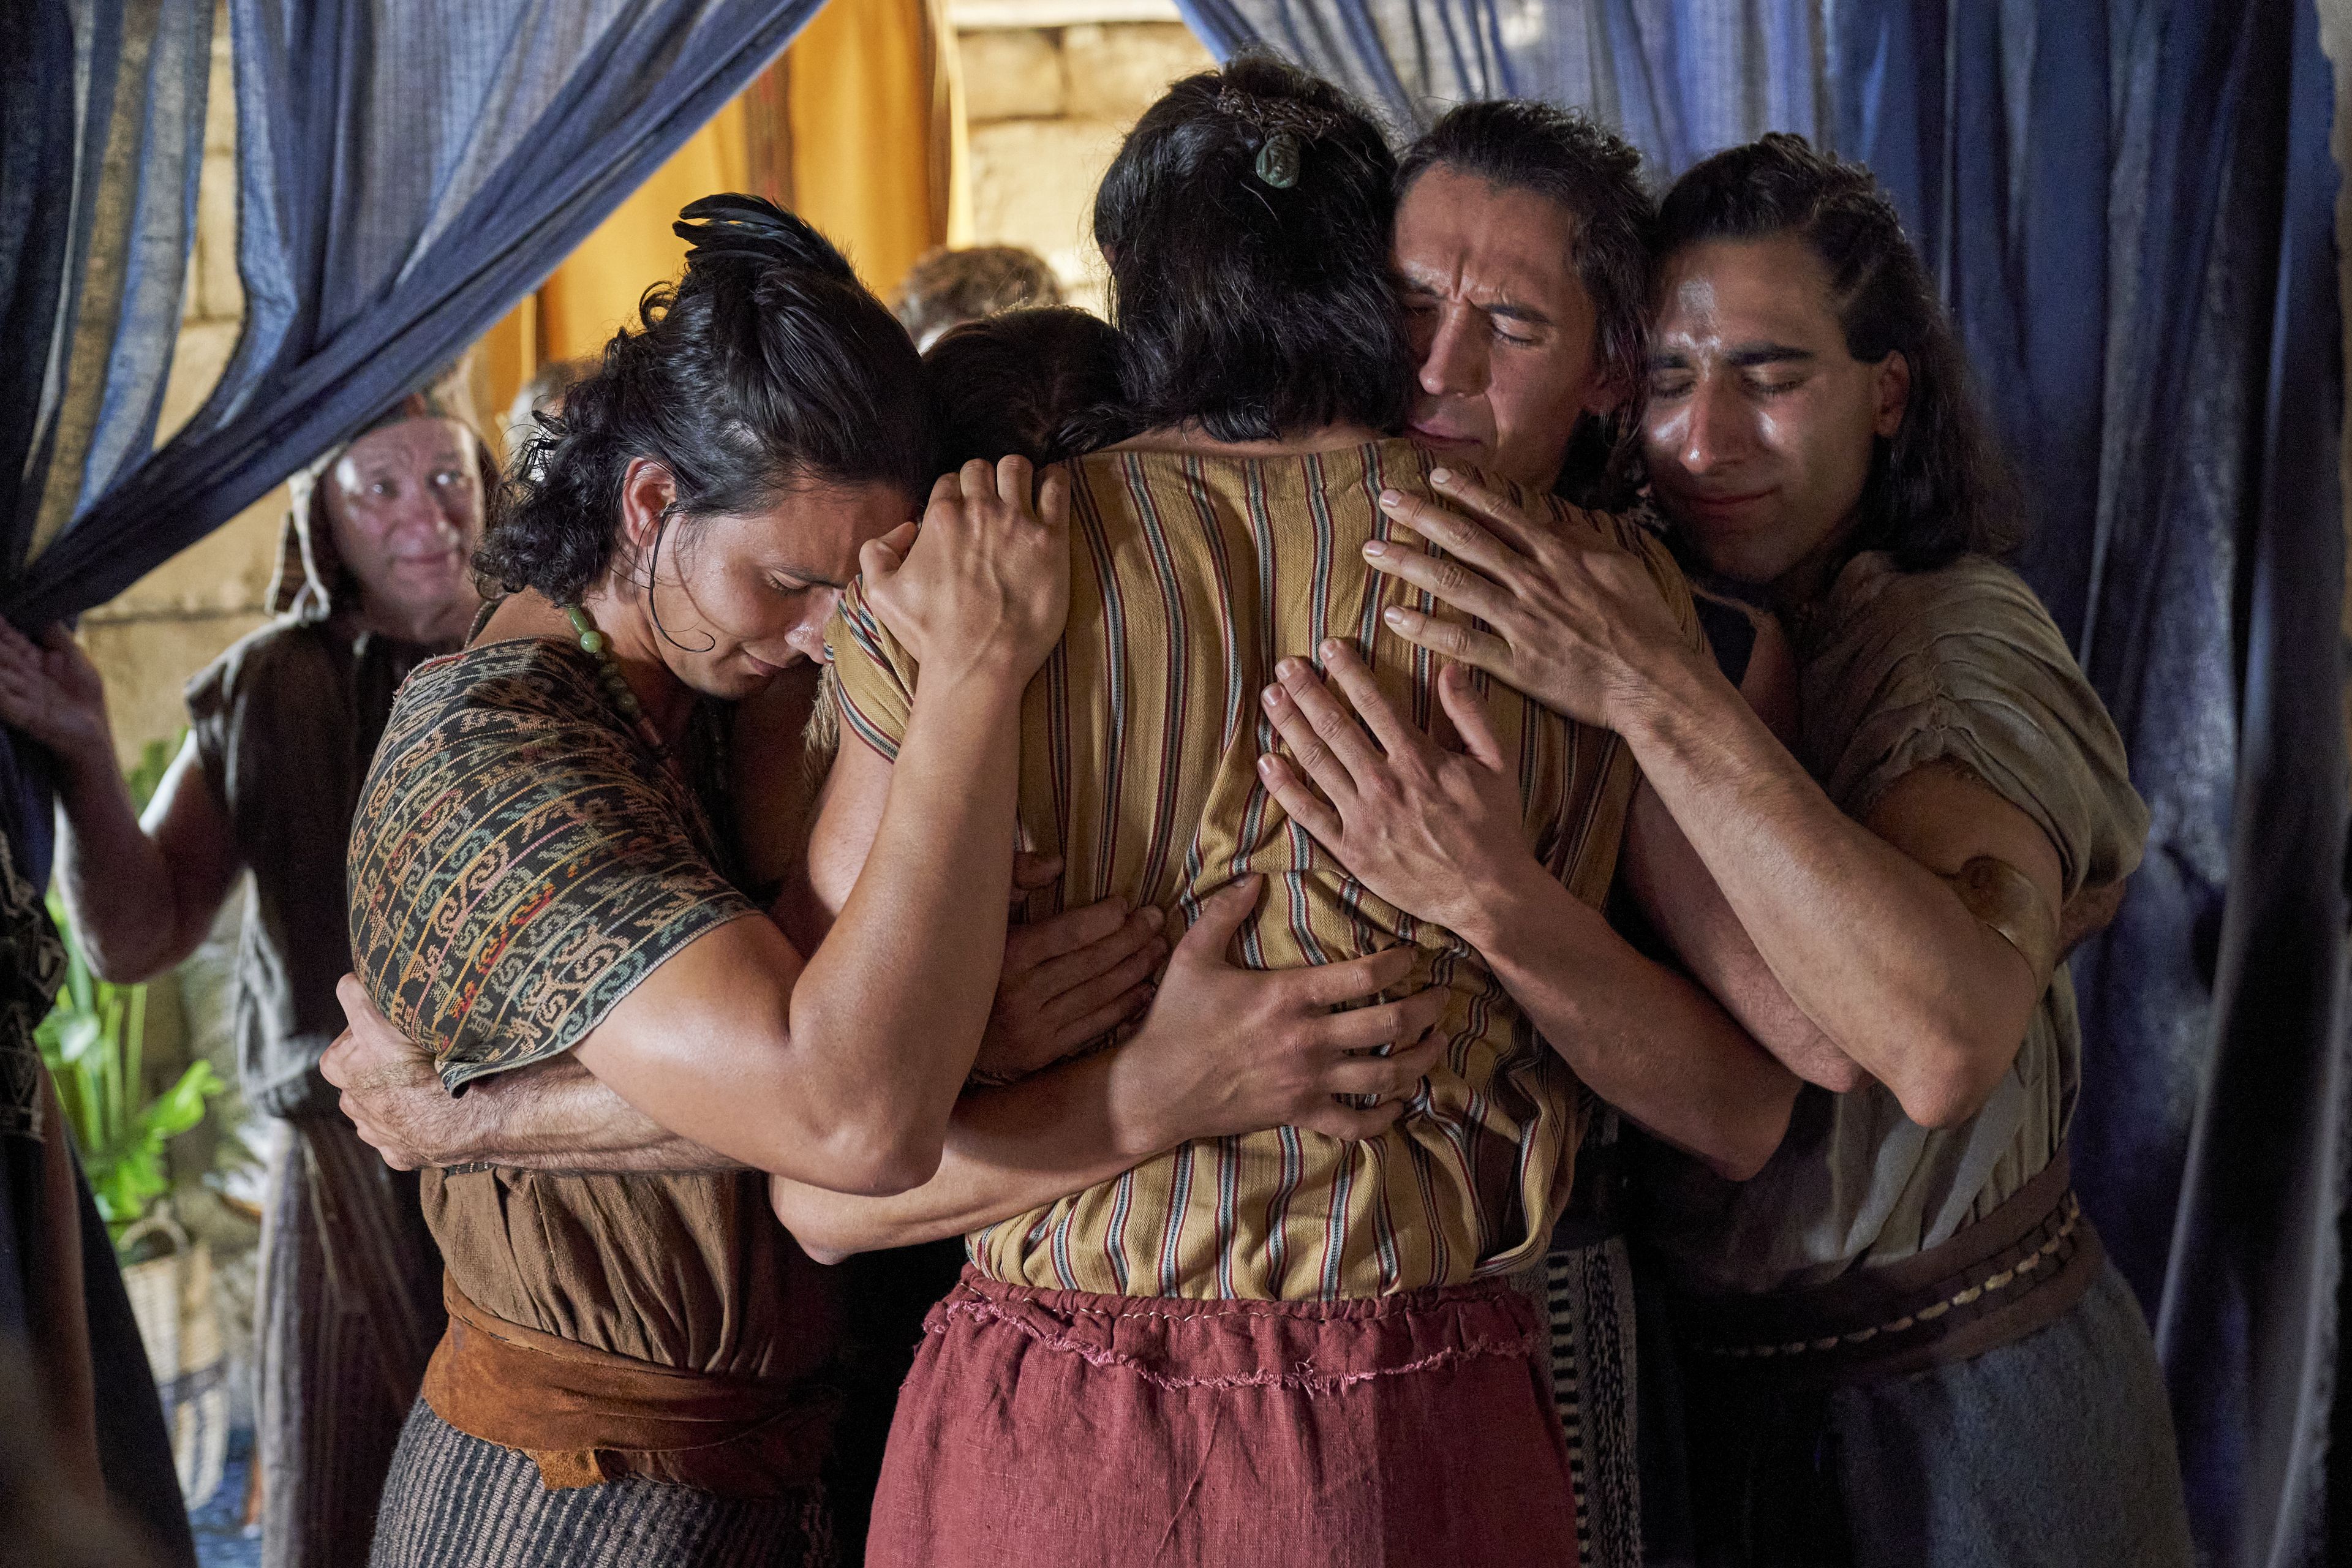 The sons of Mosiah (Aaron, Ammon, Omner, and Himni) embrace Alma the Younger after he wakes.